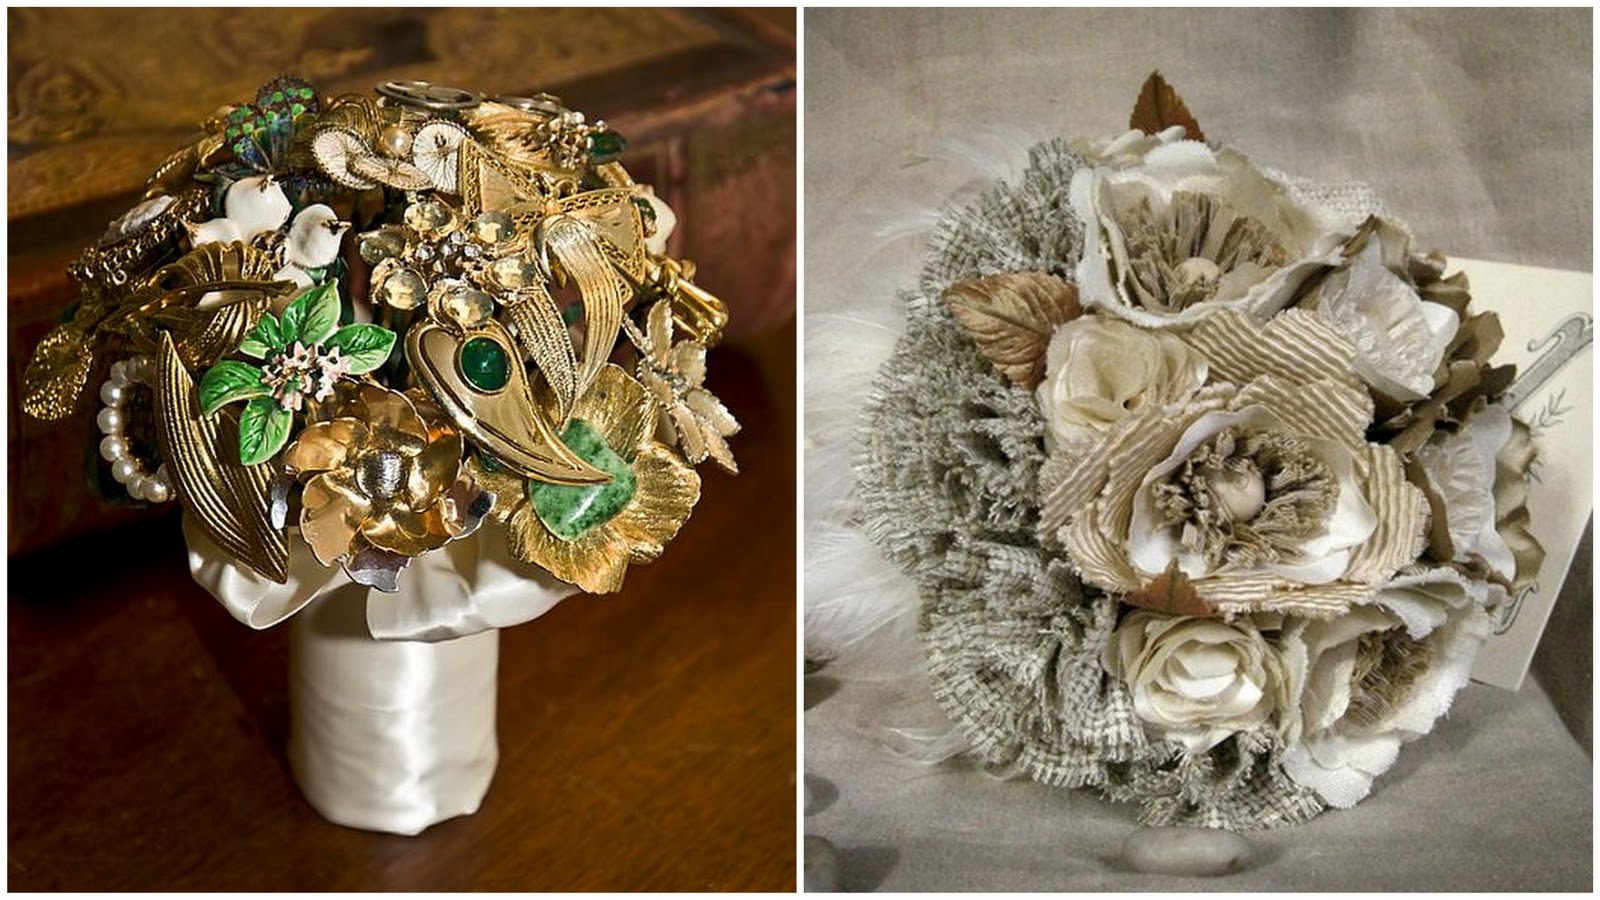 Right: Brooch bouquet